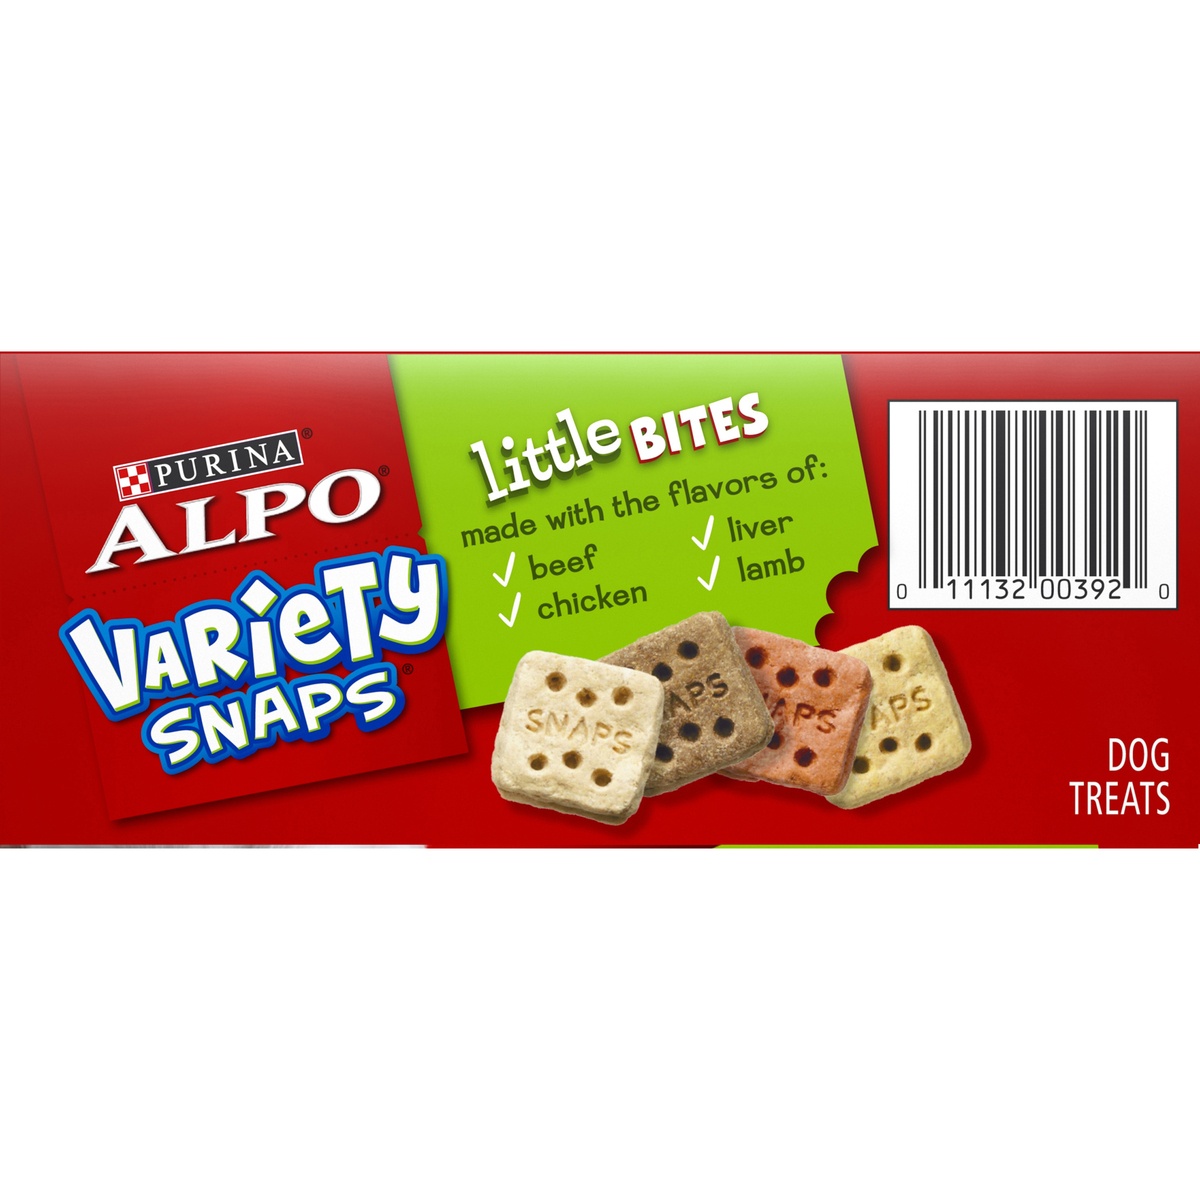 slide 8 of 11, Purina ALPO Variety Snaps Little Bites Dog Treats with Beef, Chicken, Liver & Lamb Flavors, 32 oz